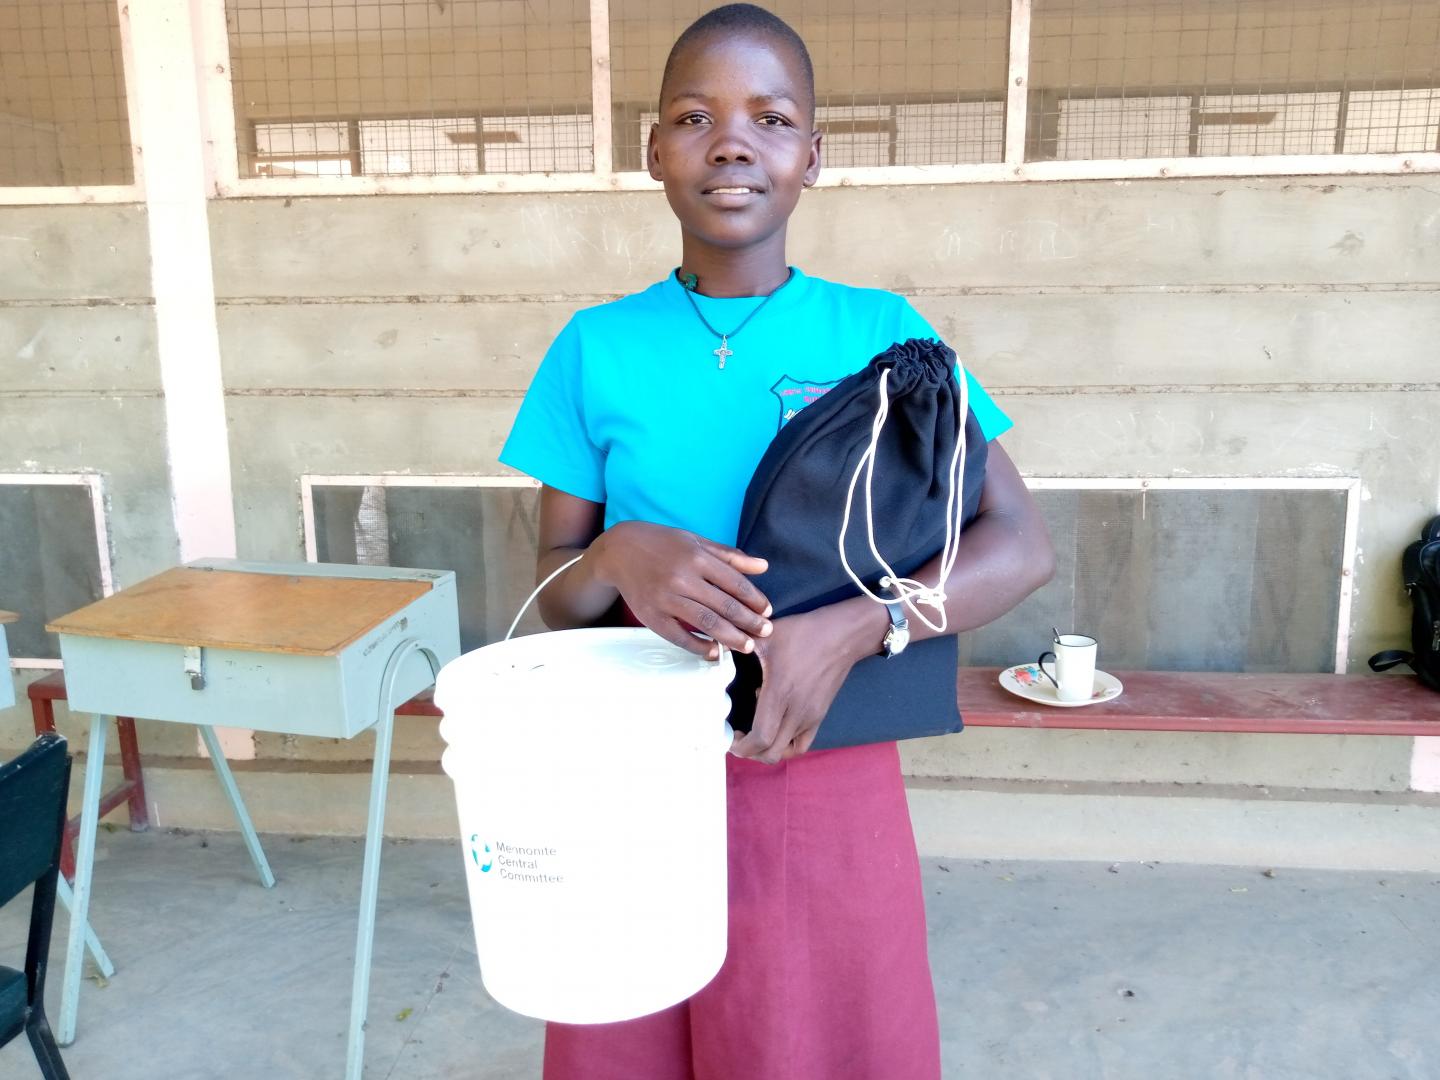 Martha Akol, 17, received an MCC dignity kit as a student at Loreto Rumbek School in South Sudan.